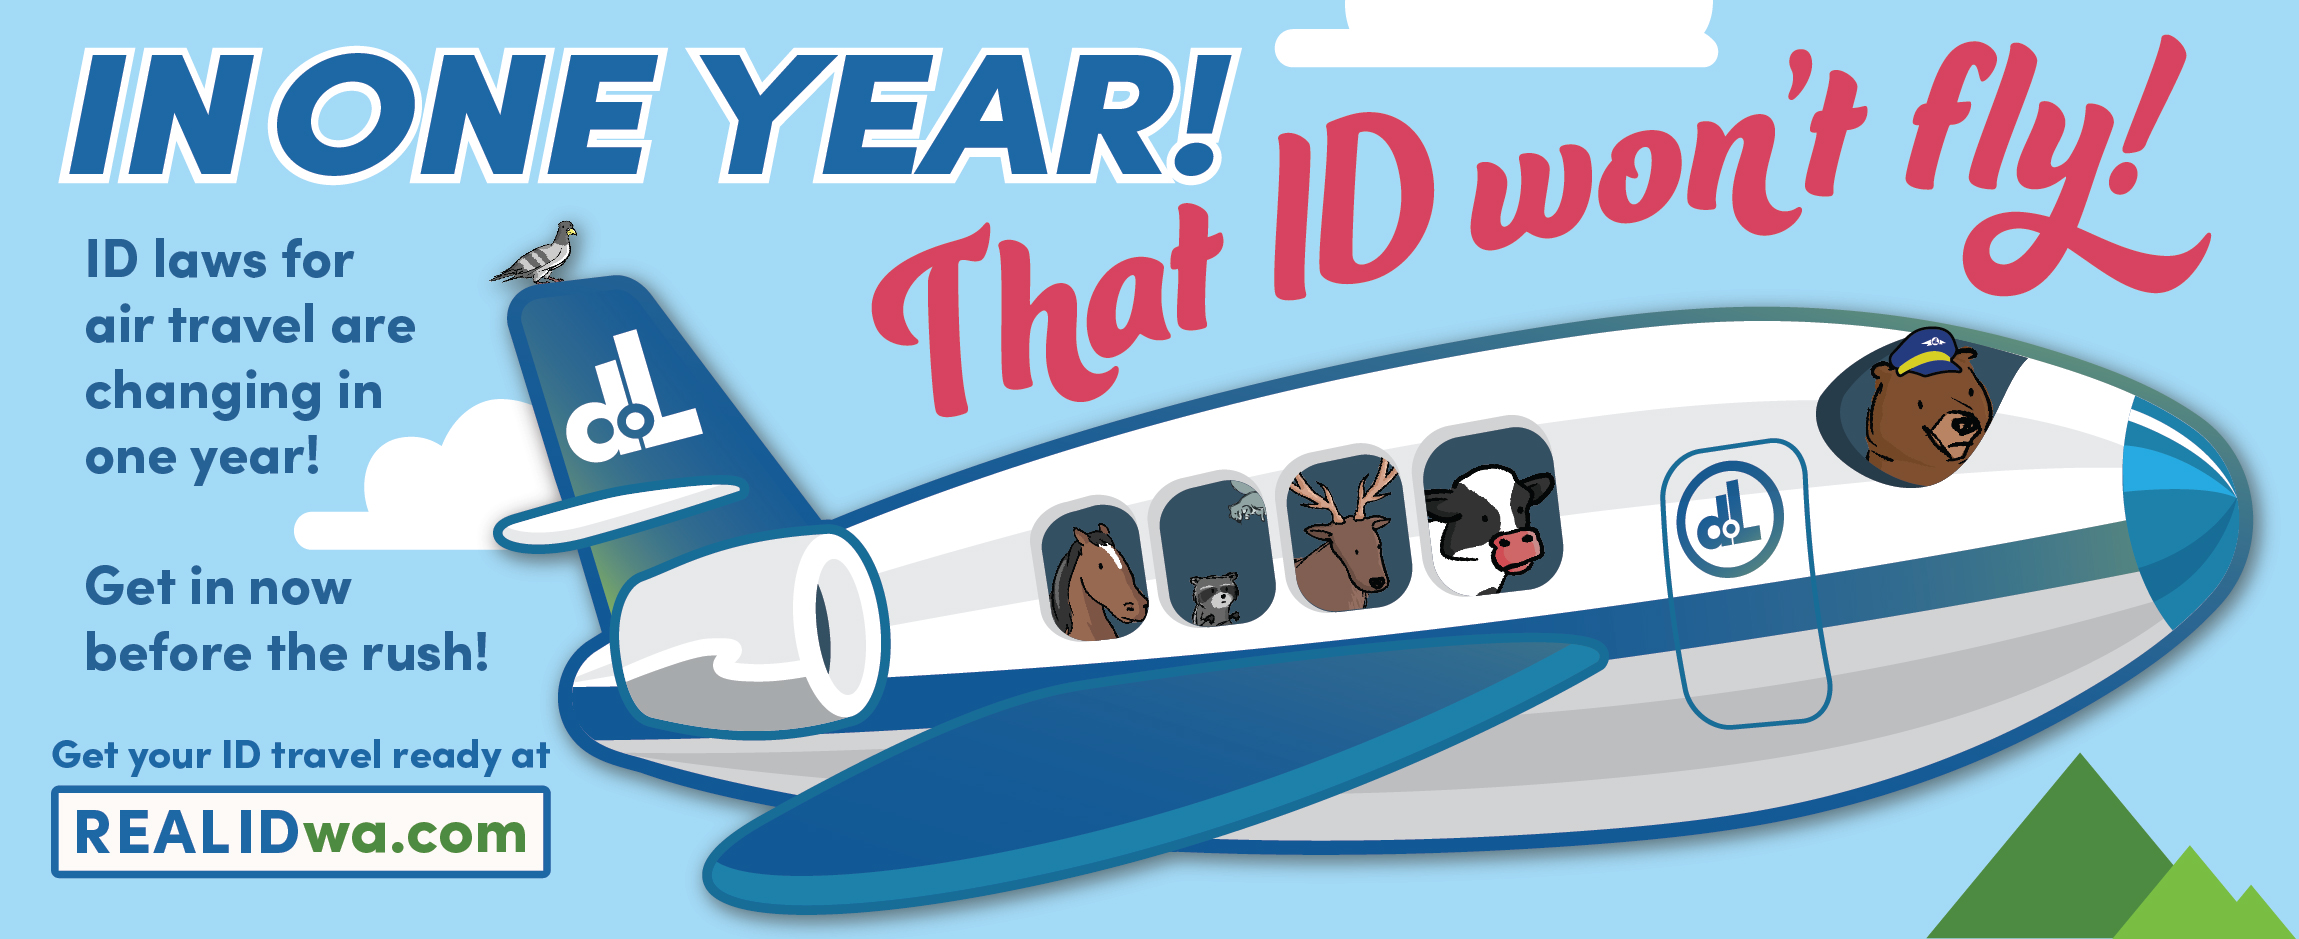 In one year! That ID won't fly! ID laws for air travel are changing in one year! Get in now before the rush! Get your ID travel ready at READID.wa.com